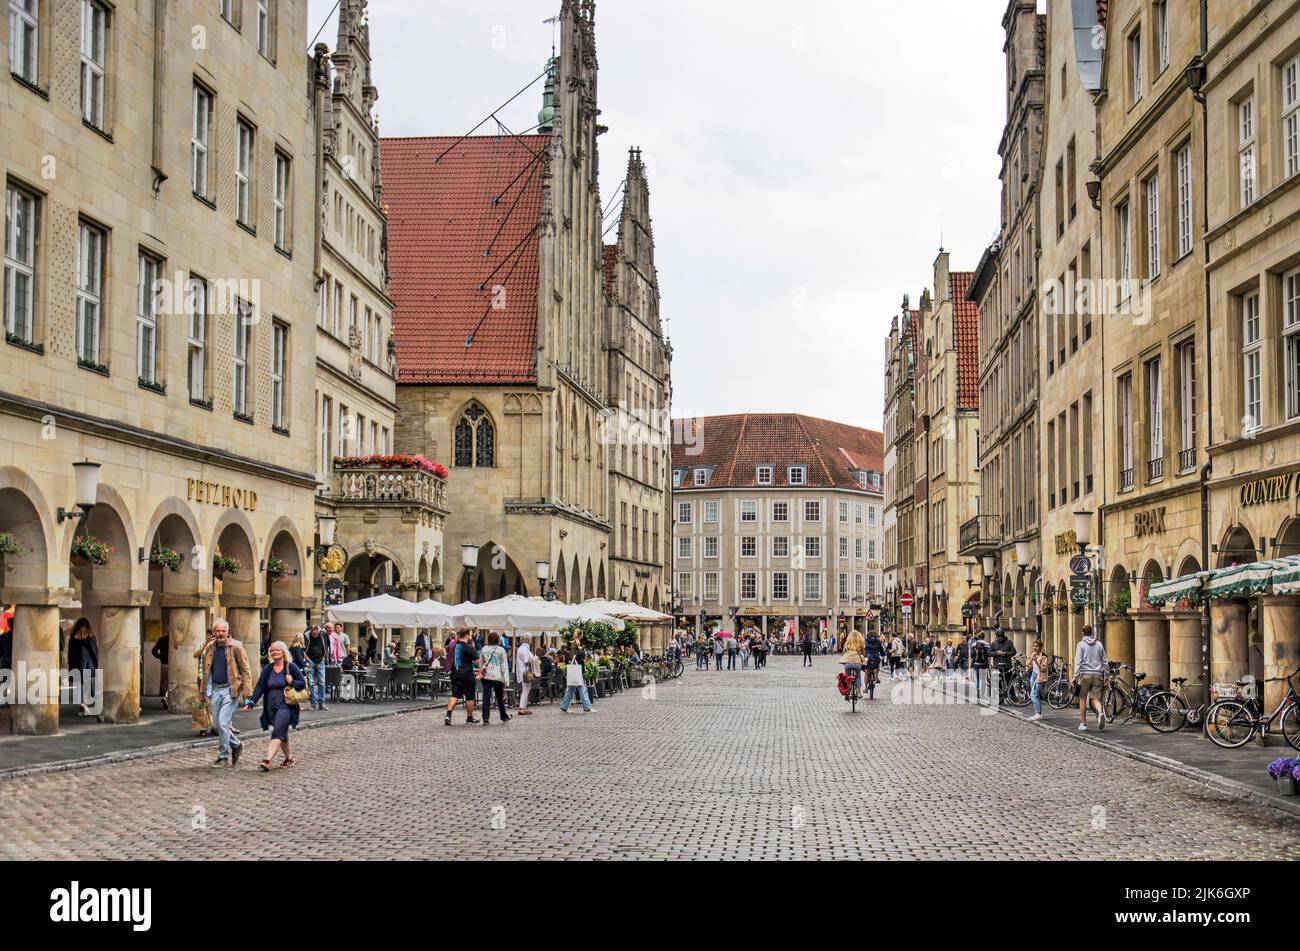 Münster, Germany, July 29, 2022: street scene at the Prinzipalmarkt, lined with historic buildings with sandstone facades Stock Photo